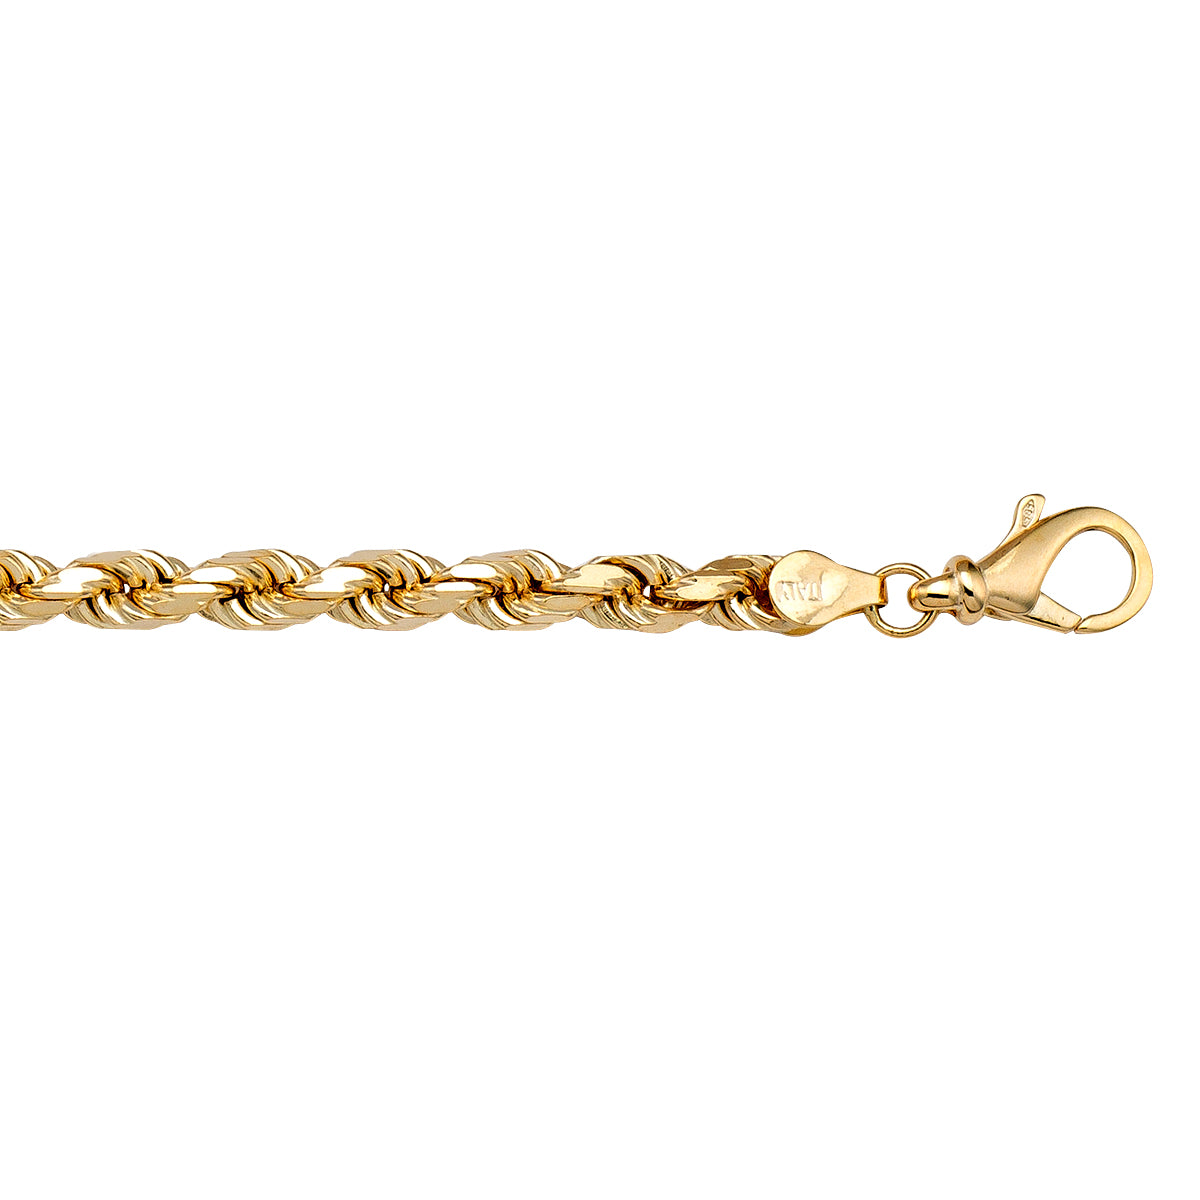 BRACELETS YELLOW GOLD SOLID ROPE LINK CHAIN